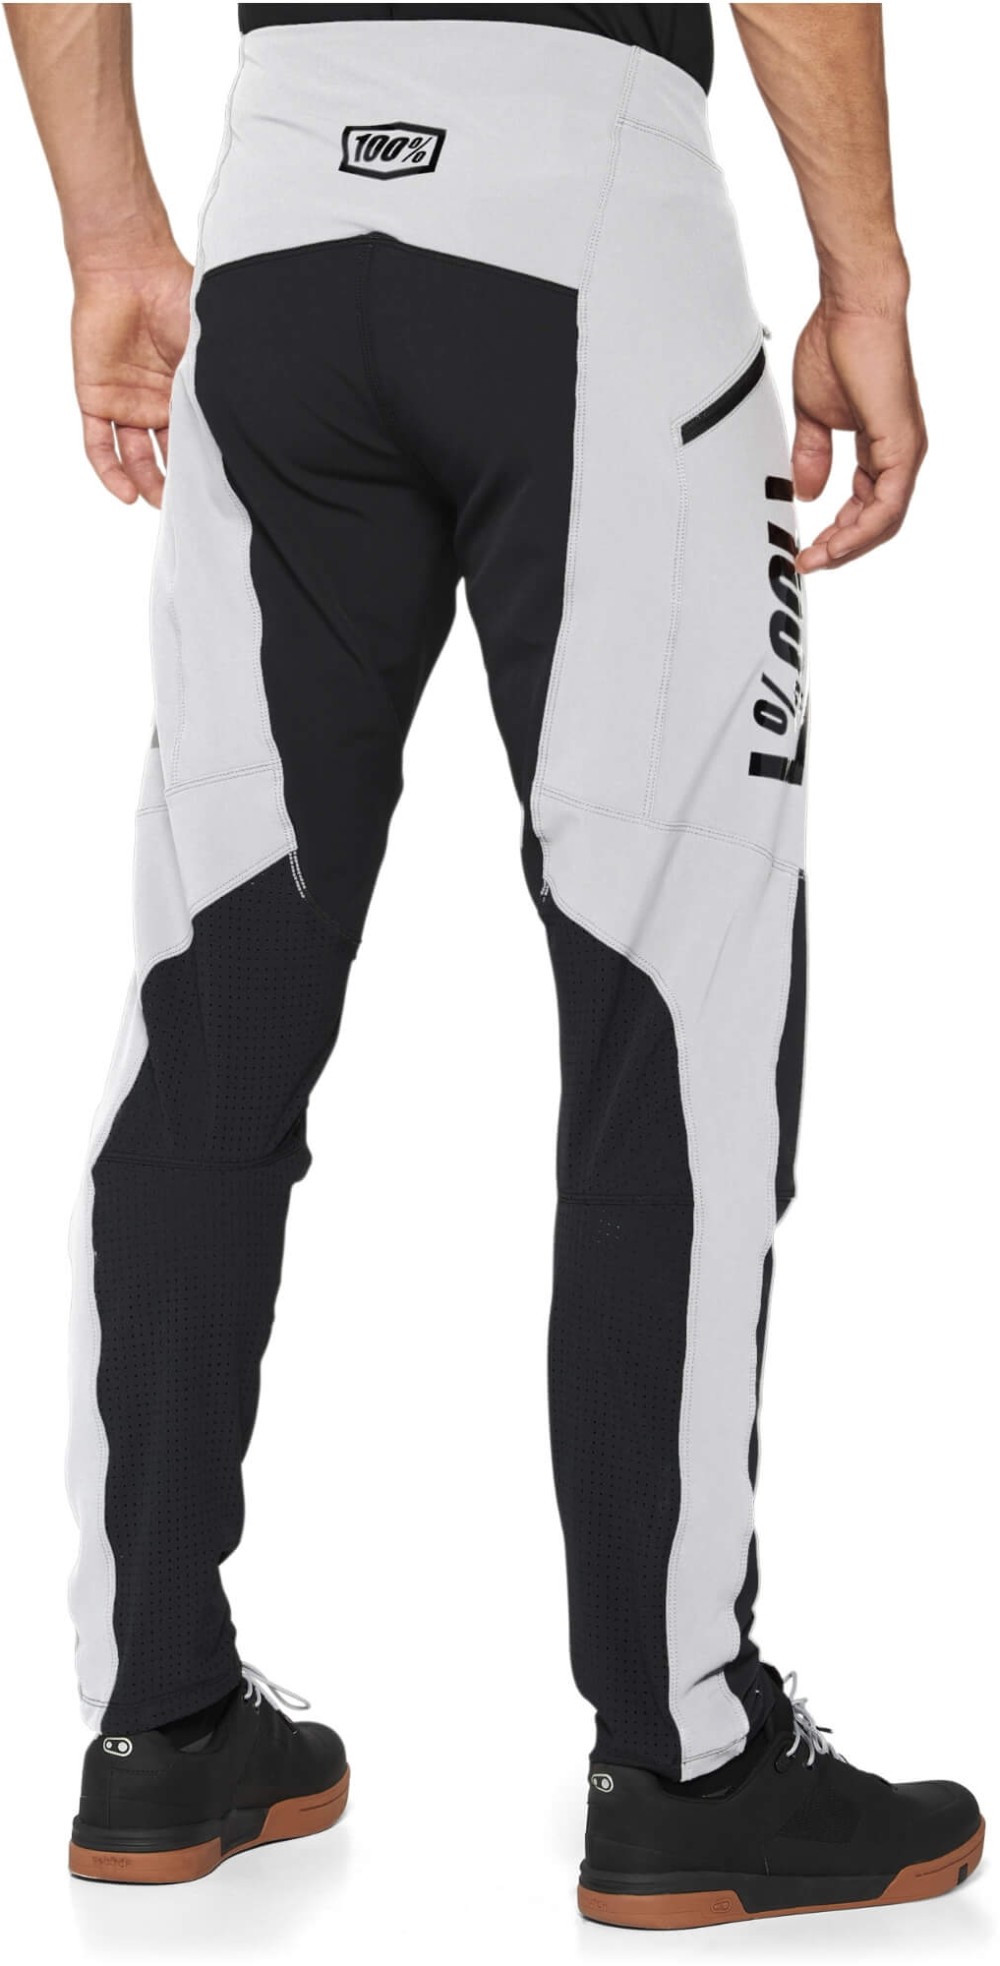 R-Core X MTB Cycling Trousers image 1